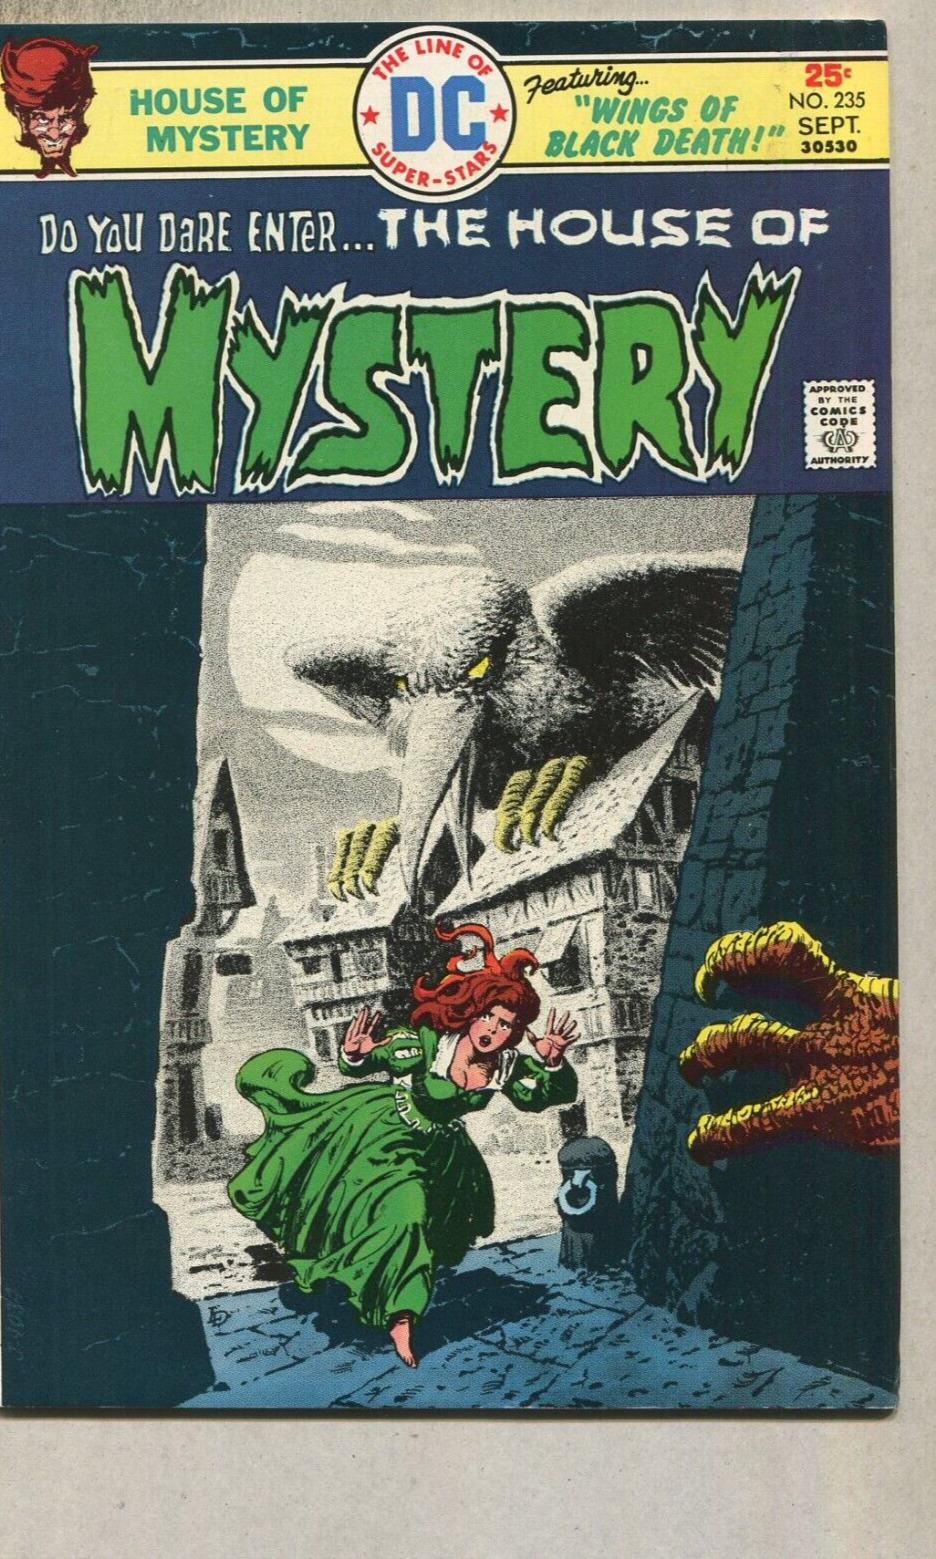 The House Of Mystery #235 VF Wings OF Black Death DC Comics  CBX16A